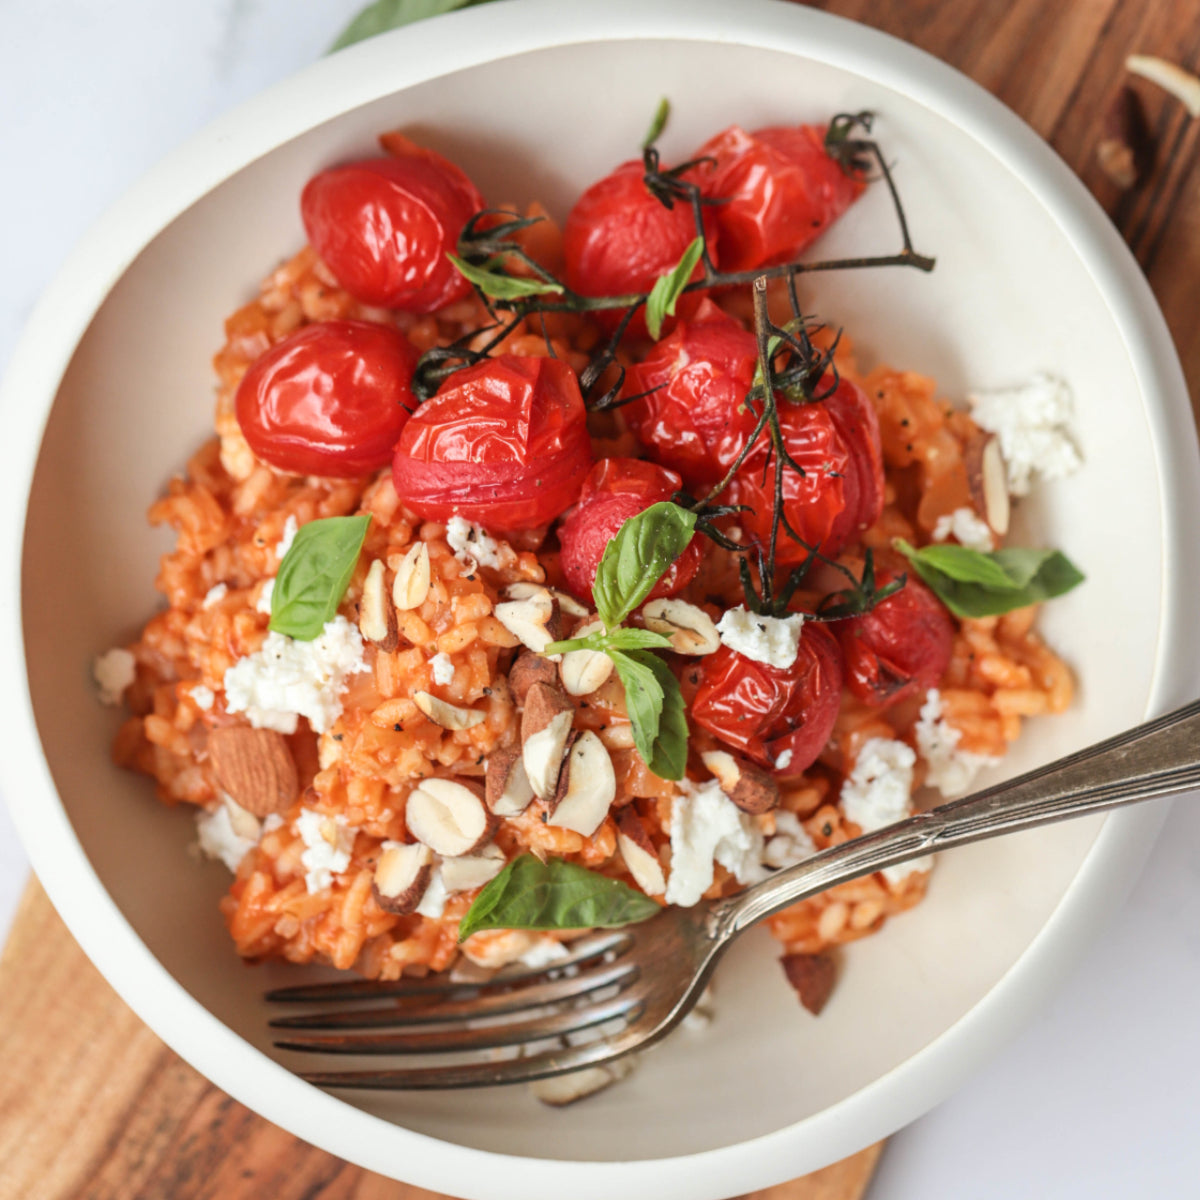 Tomato Risotto with Grilled Tomatoes, Almonds & Basil